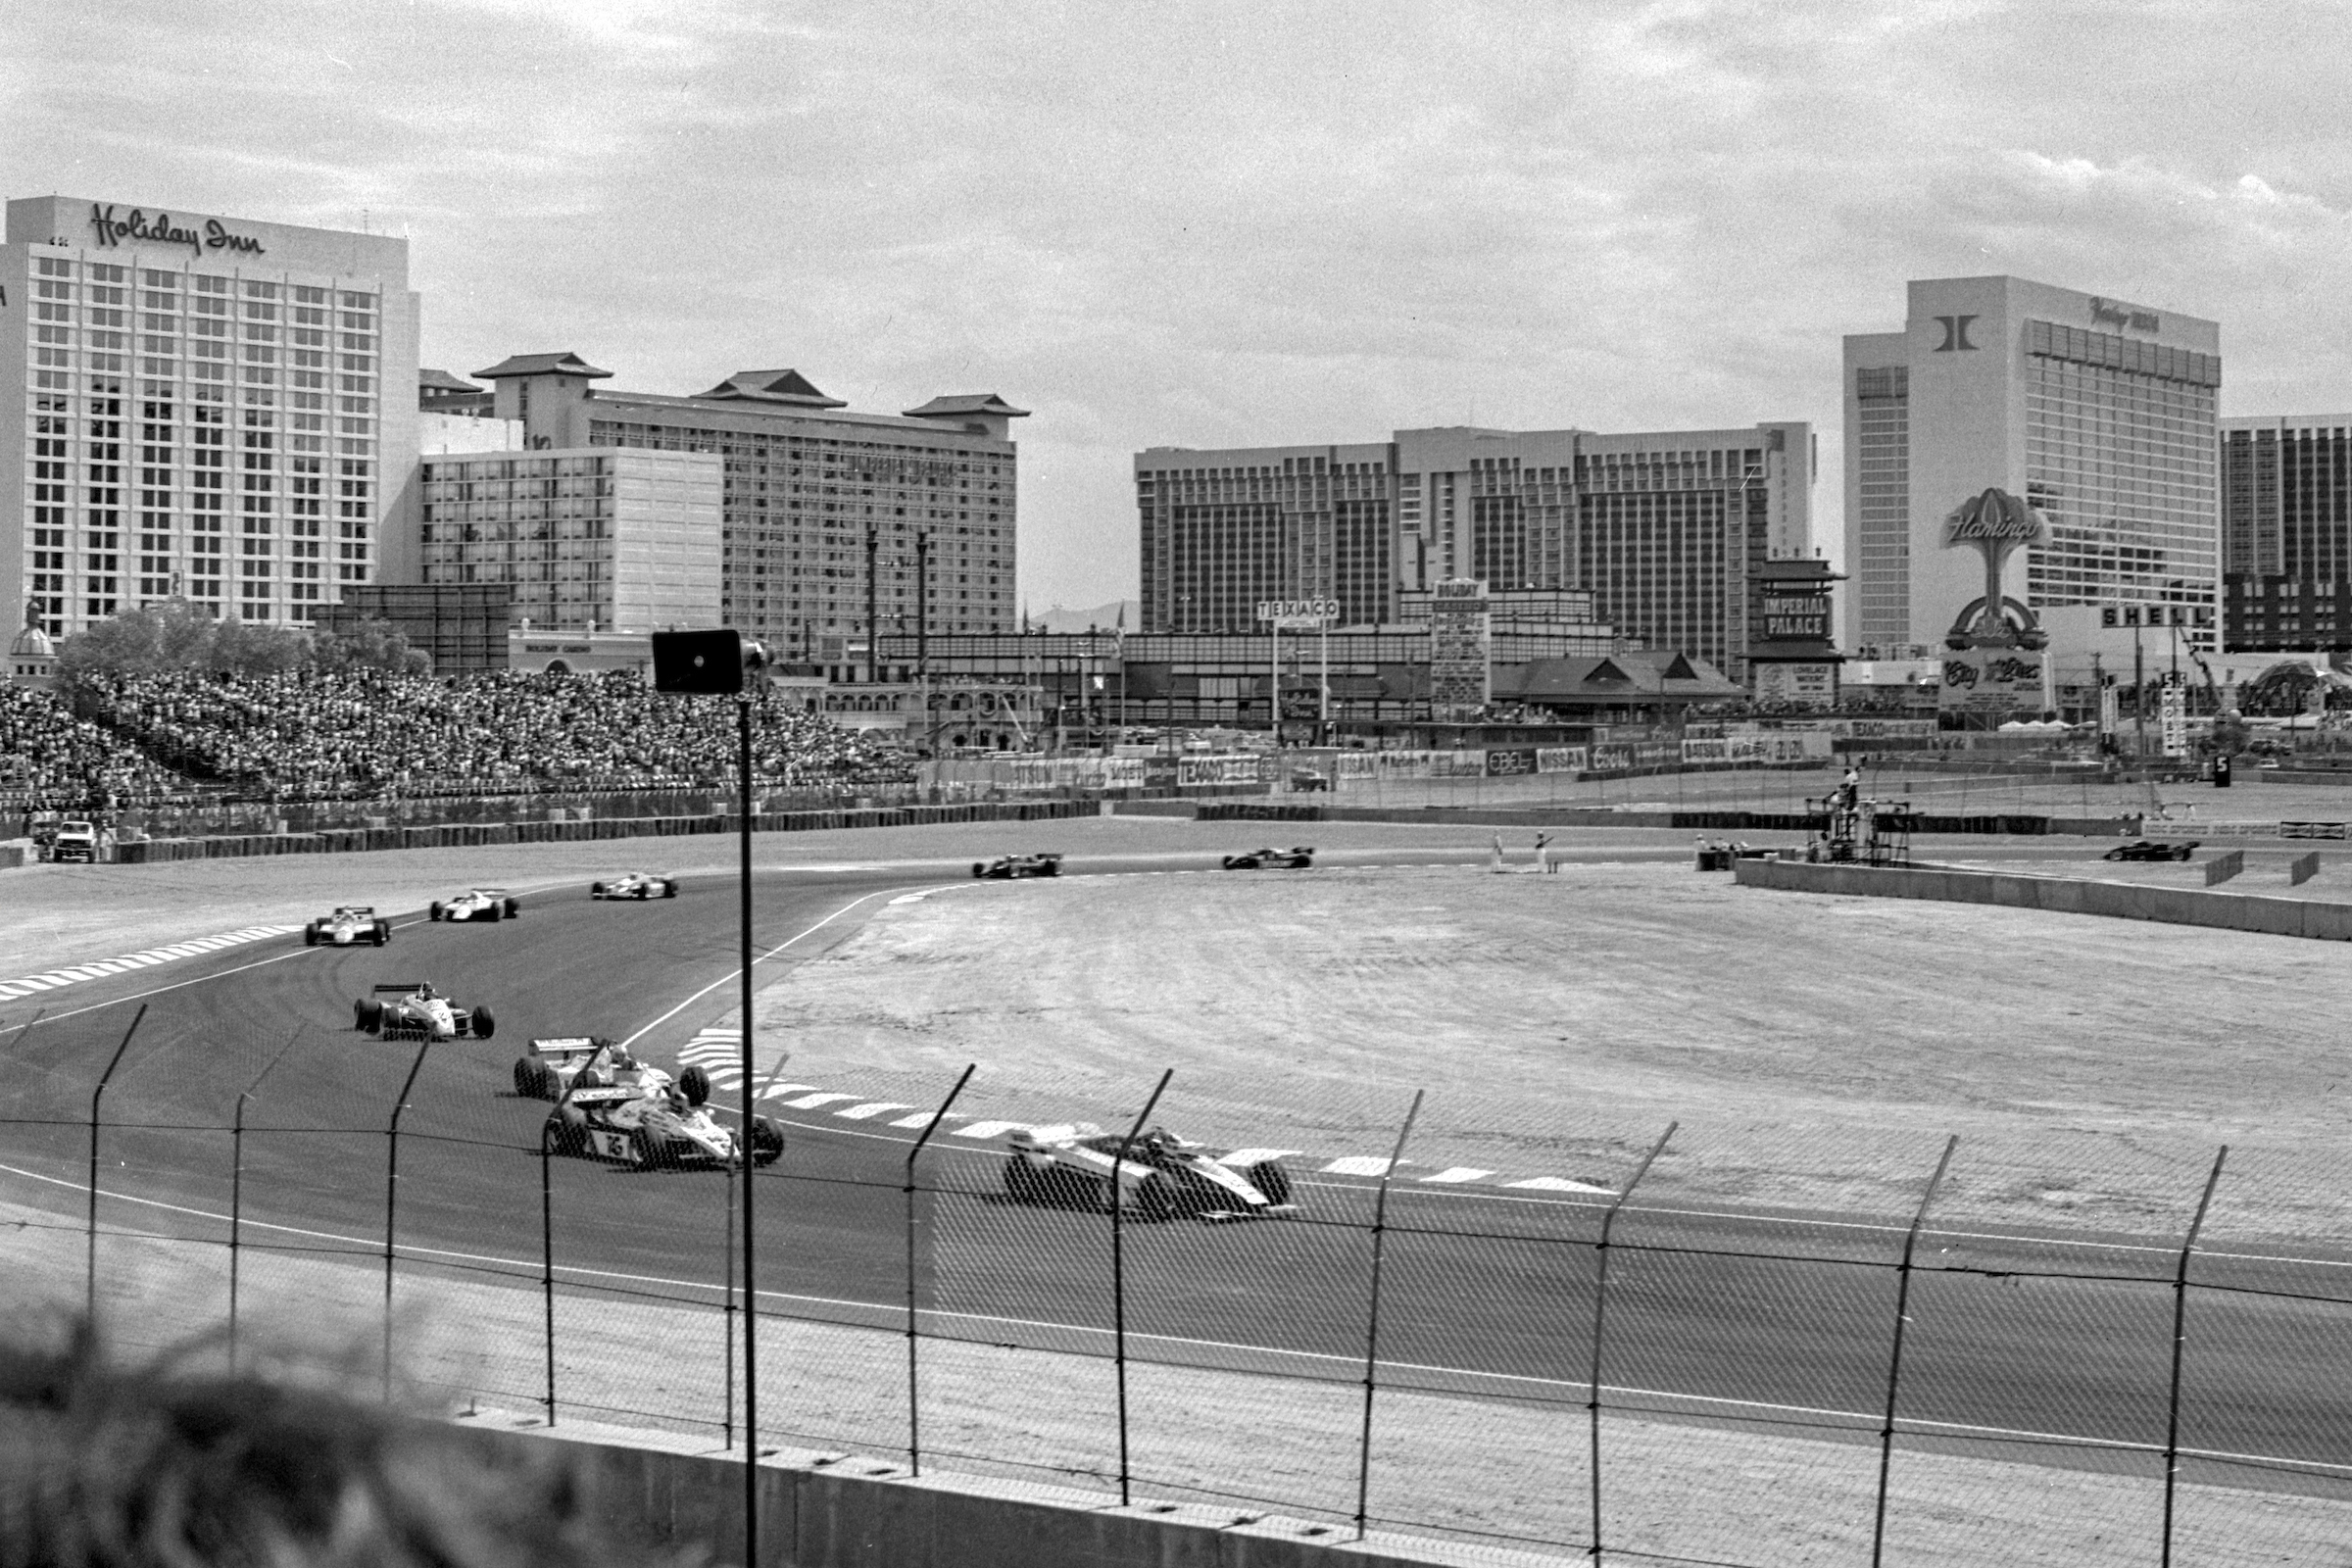 PHOTOS Remember when F1 was held on Las Vegas Strip at Caesars Palace Grand Prix?